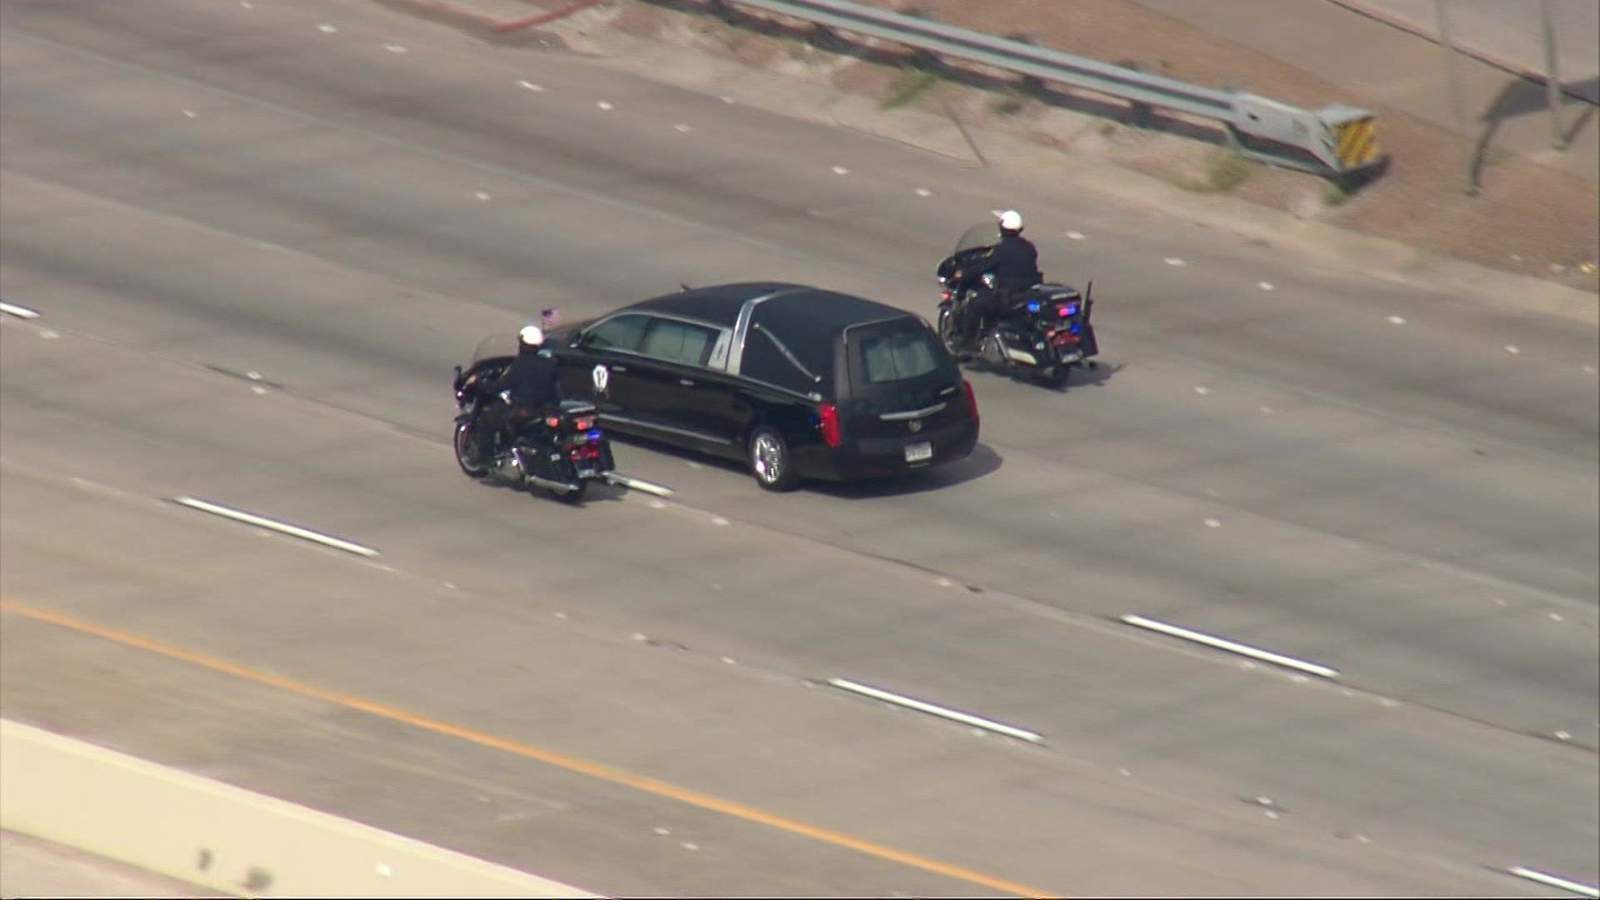 Body of HPD Sgt. Preston escorted to funeral home